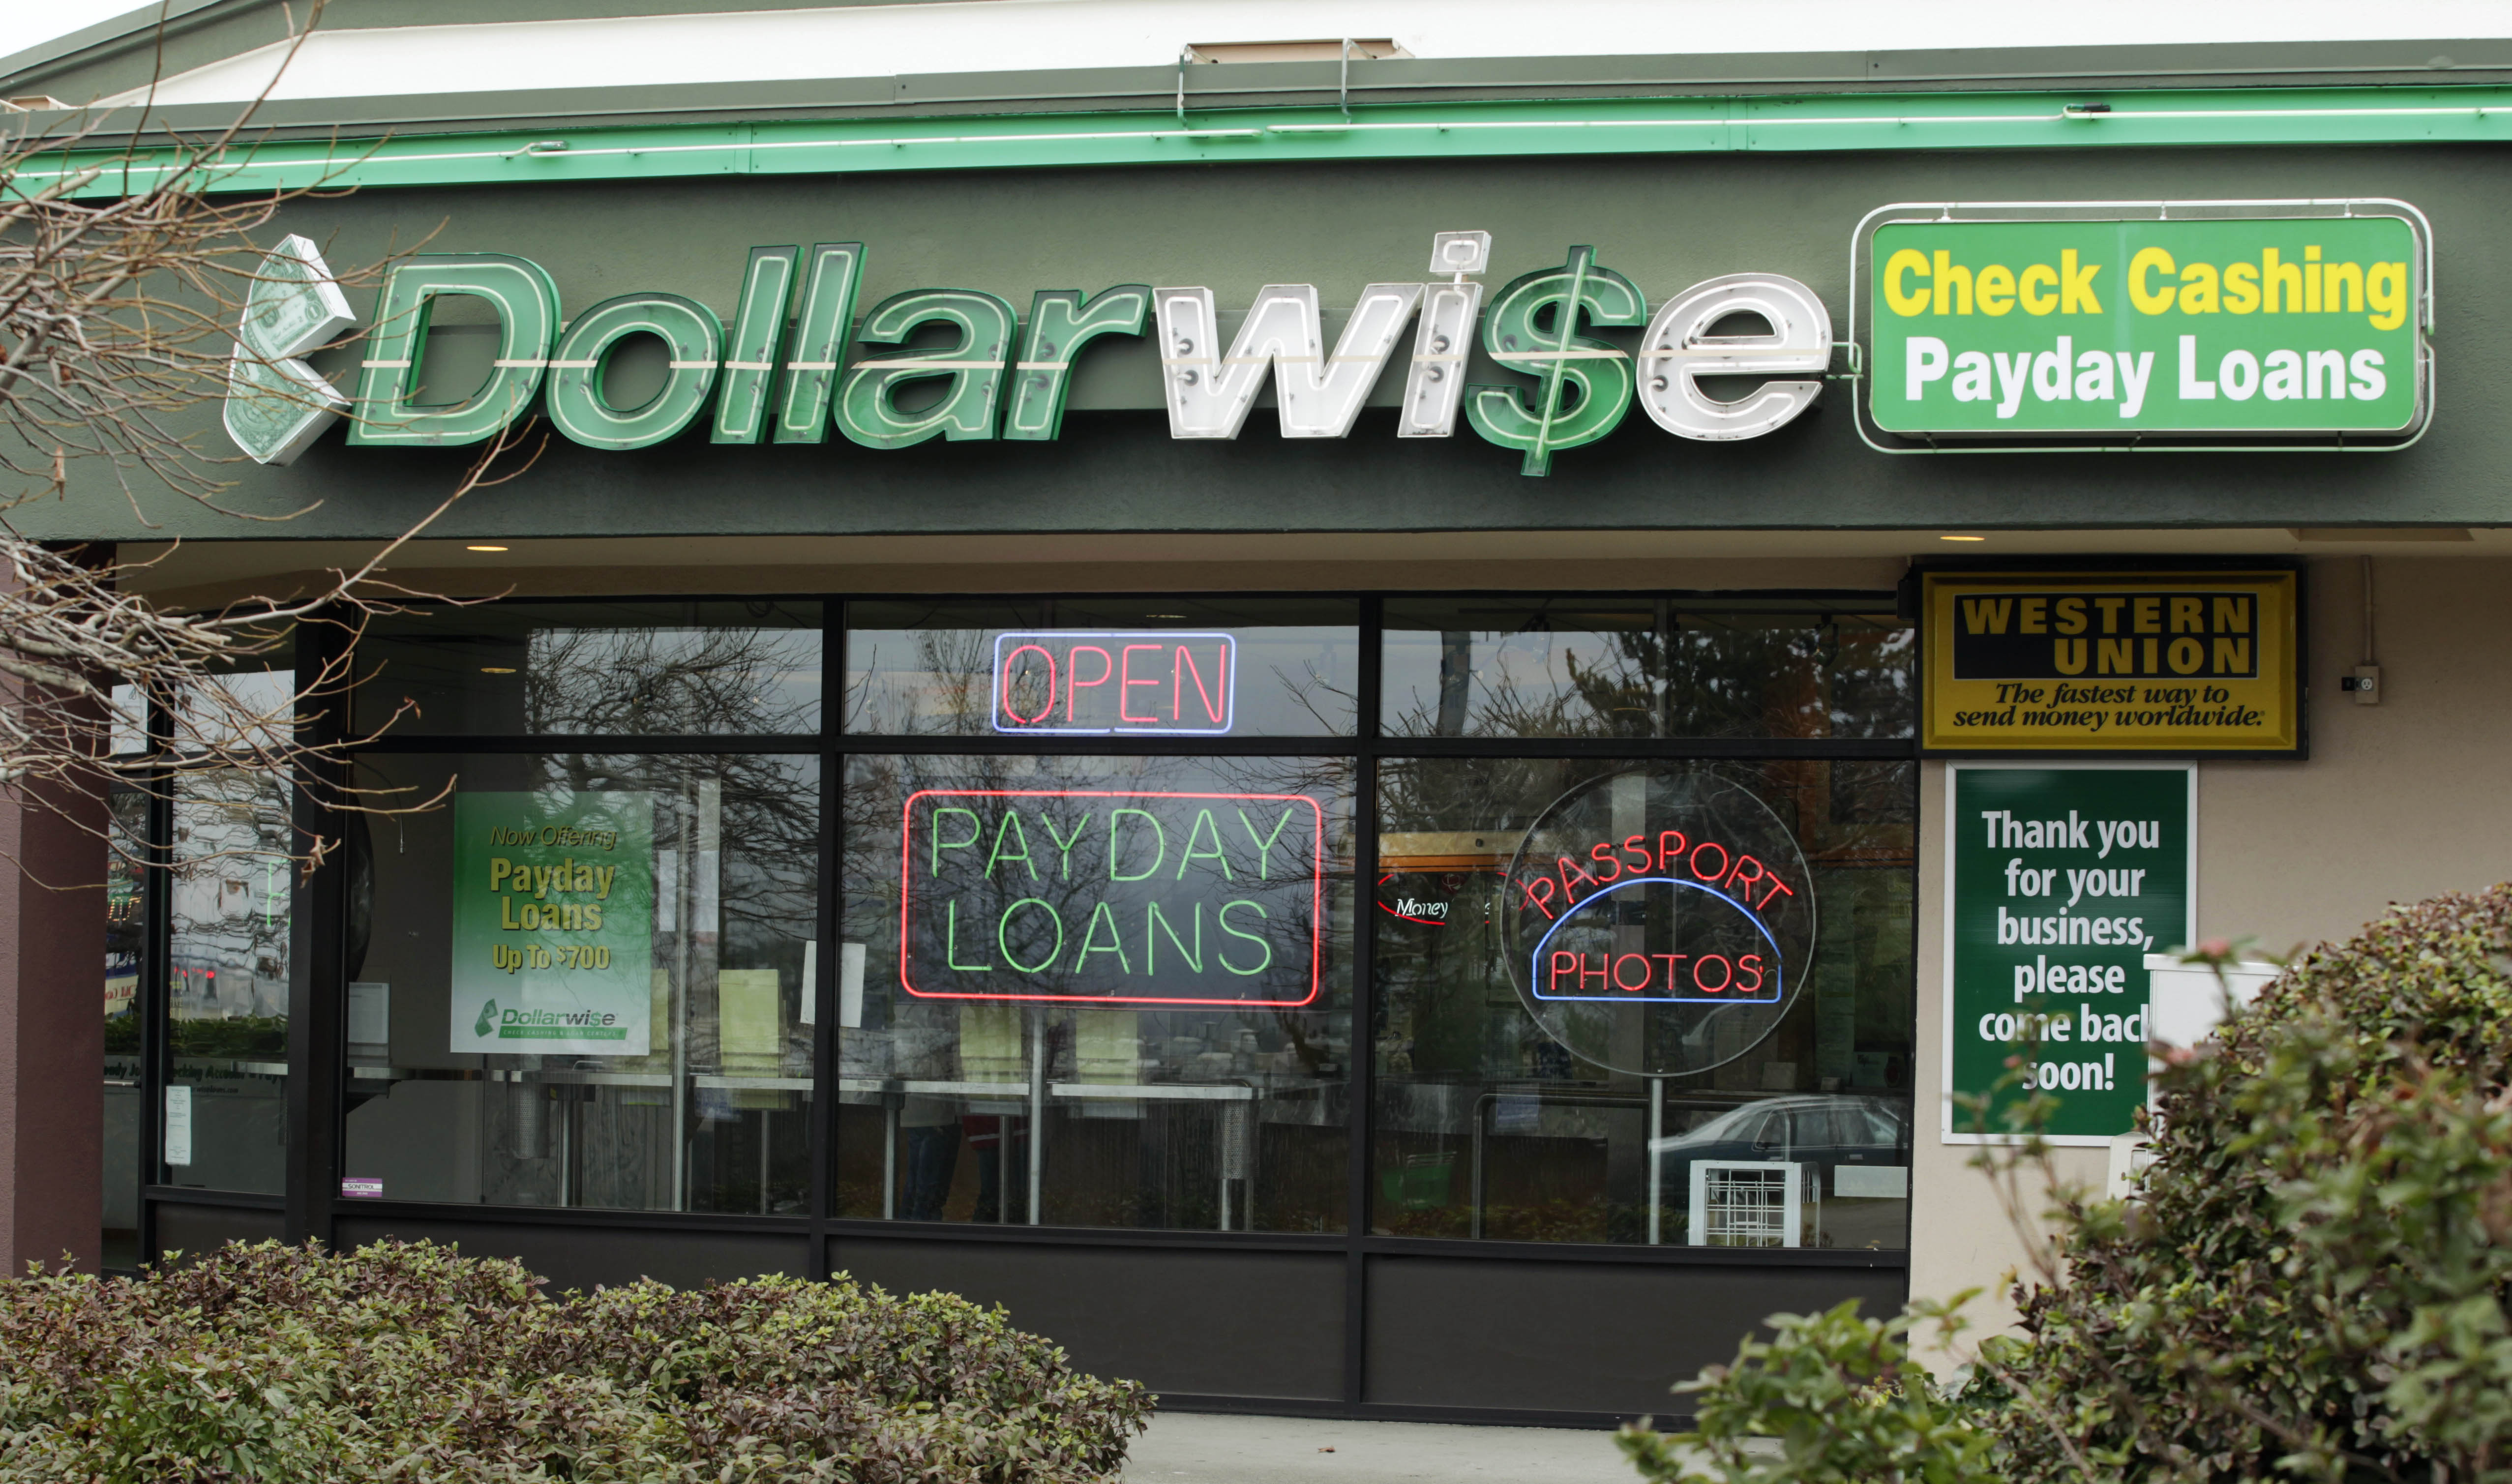 Rules grow, but profits for payday lenders soar - The Blade